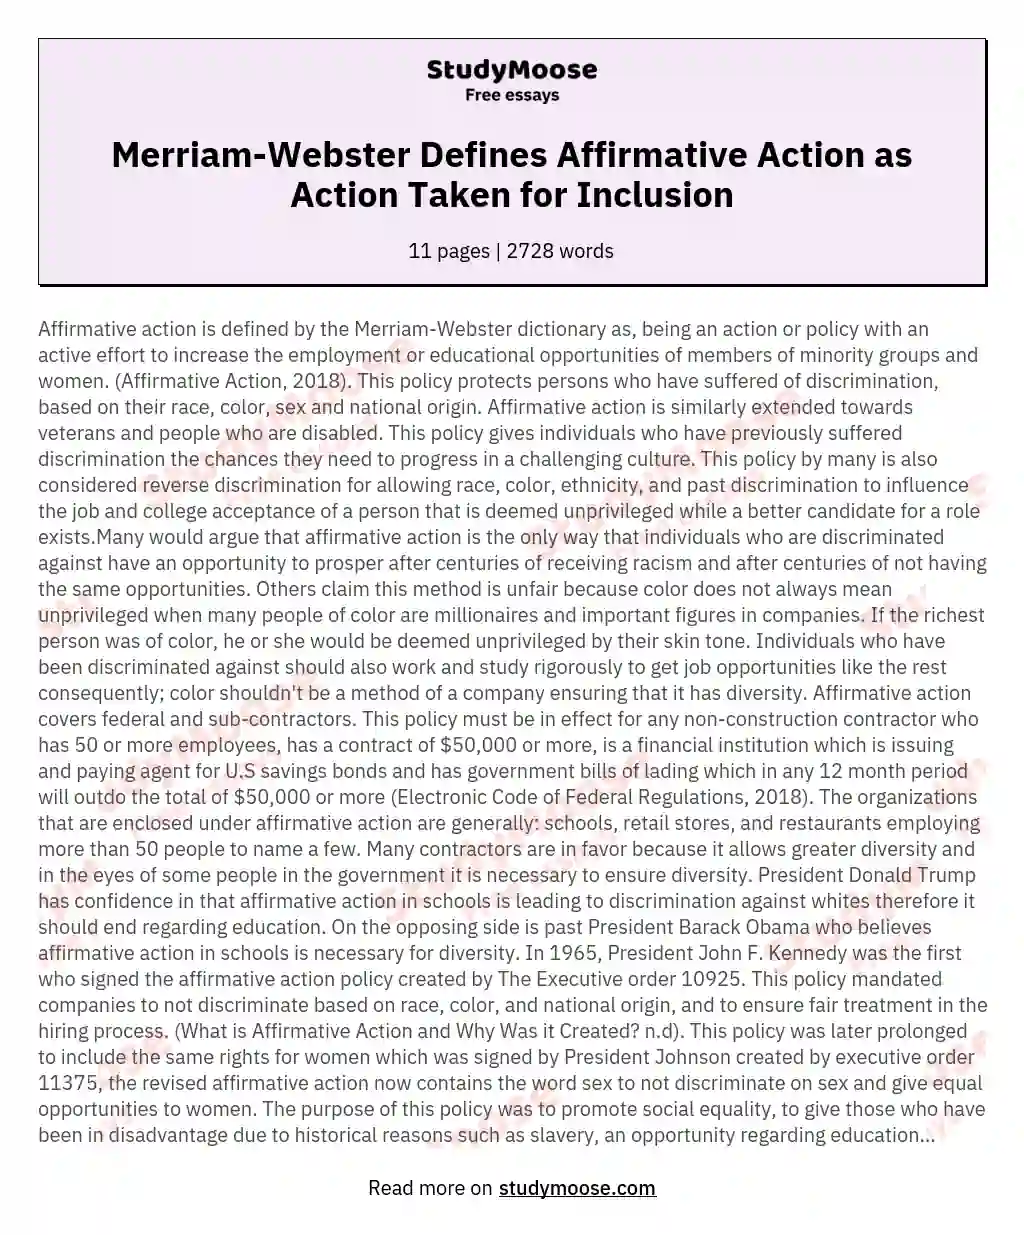 Merriam-Webster Defines Affirmative Action as Action Taken for Inclusion essay